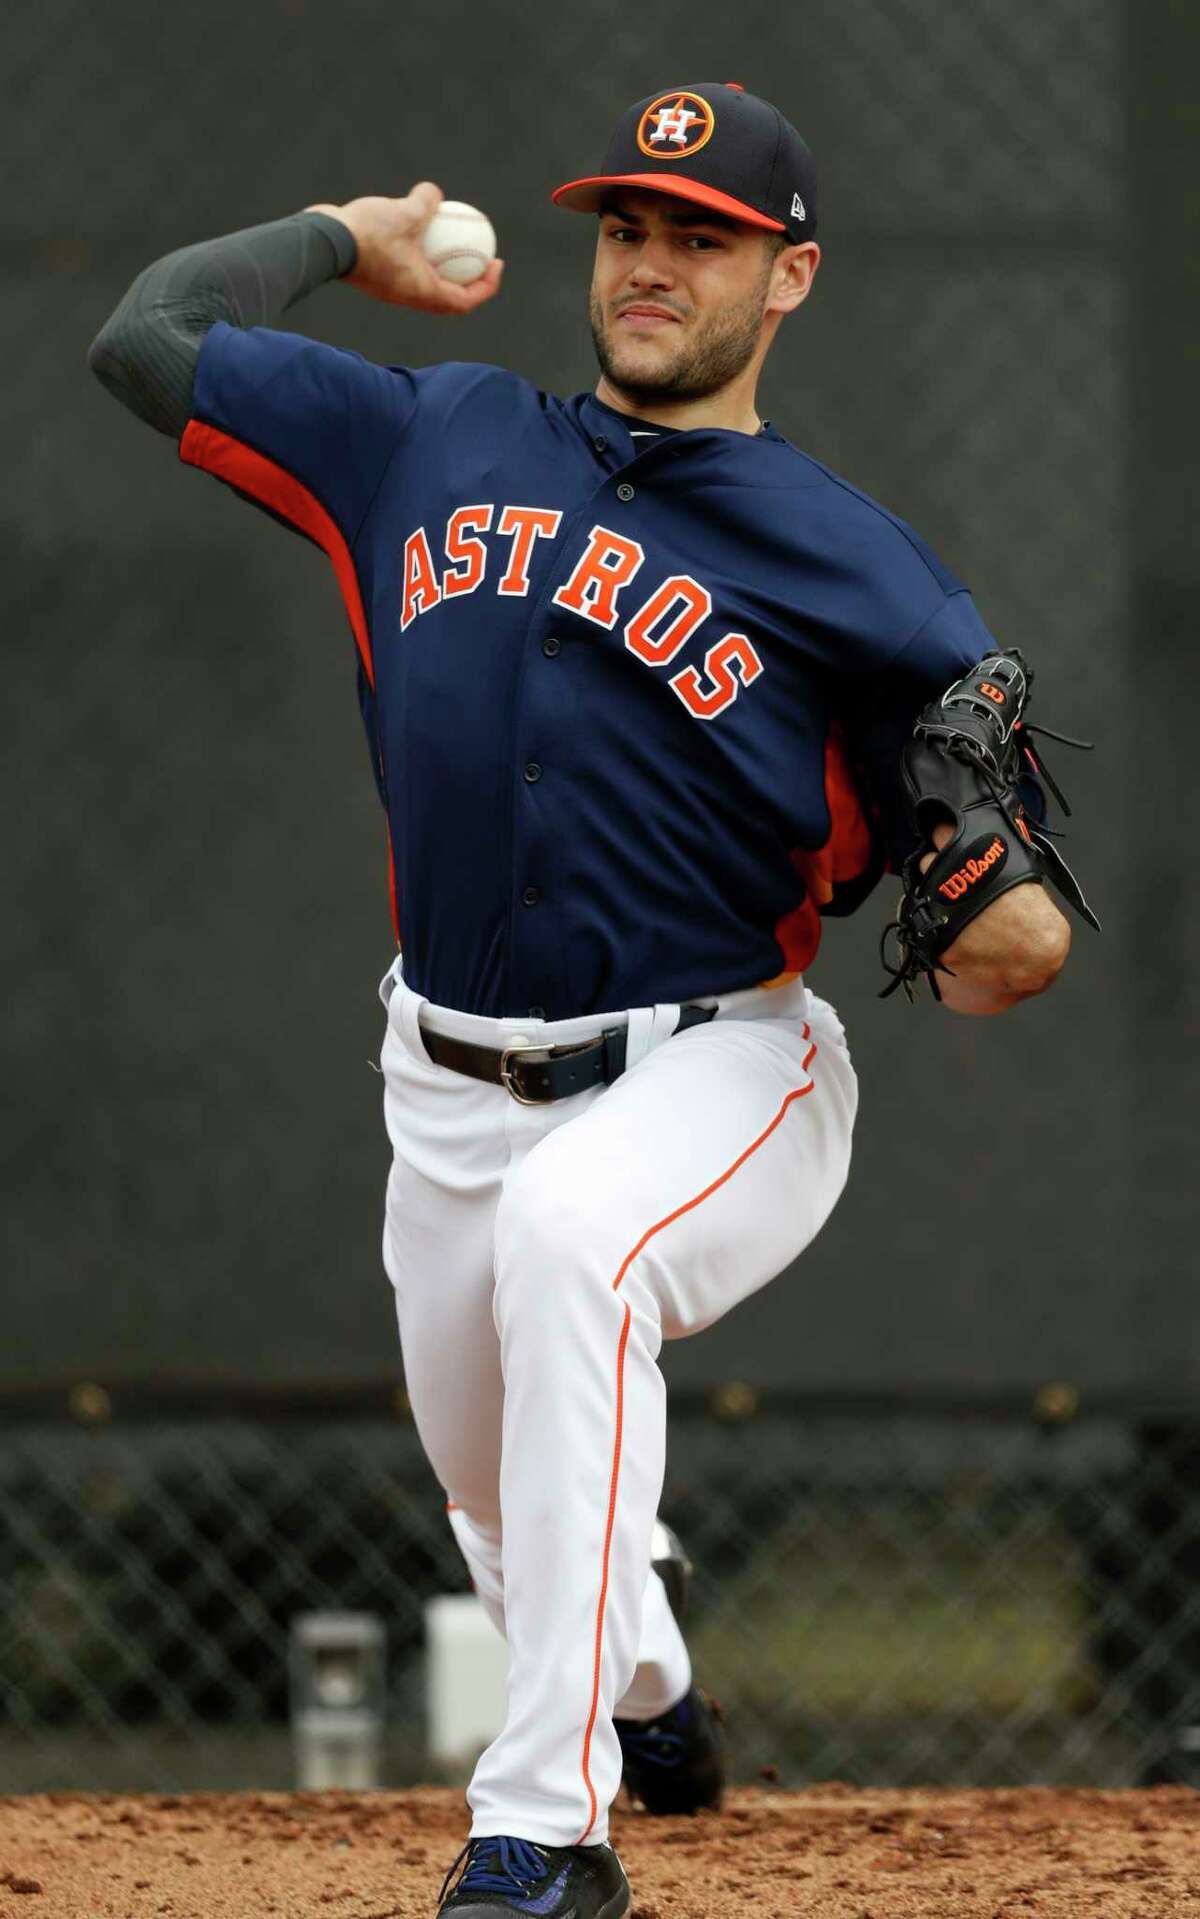 Houston Astros starting pitcher Lance McCullers pitches during spring training at The Ballpark of the Palm Beaches, in West Palm Beach, Florida, Thursday, February 16, 2017. ( Karen Warren / Houston Chronicle )